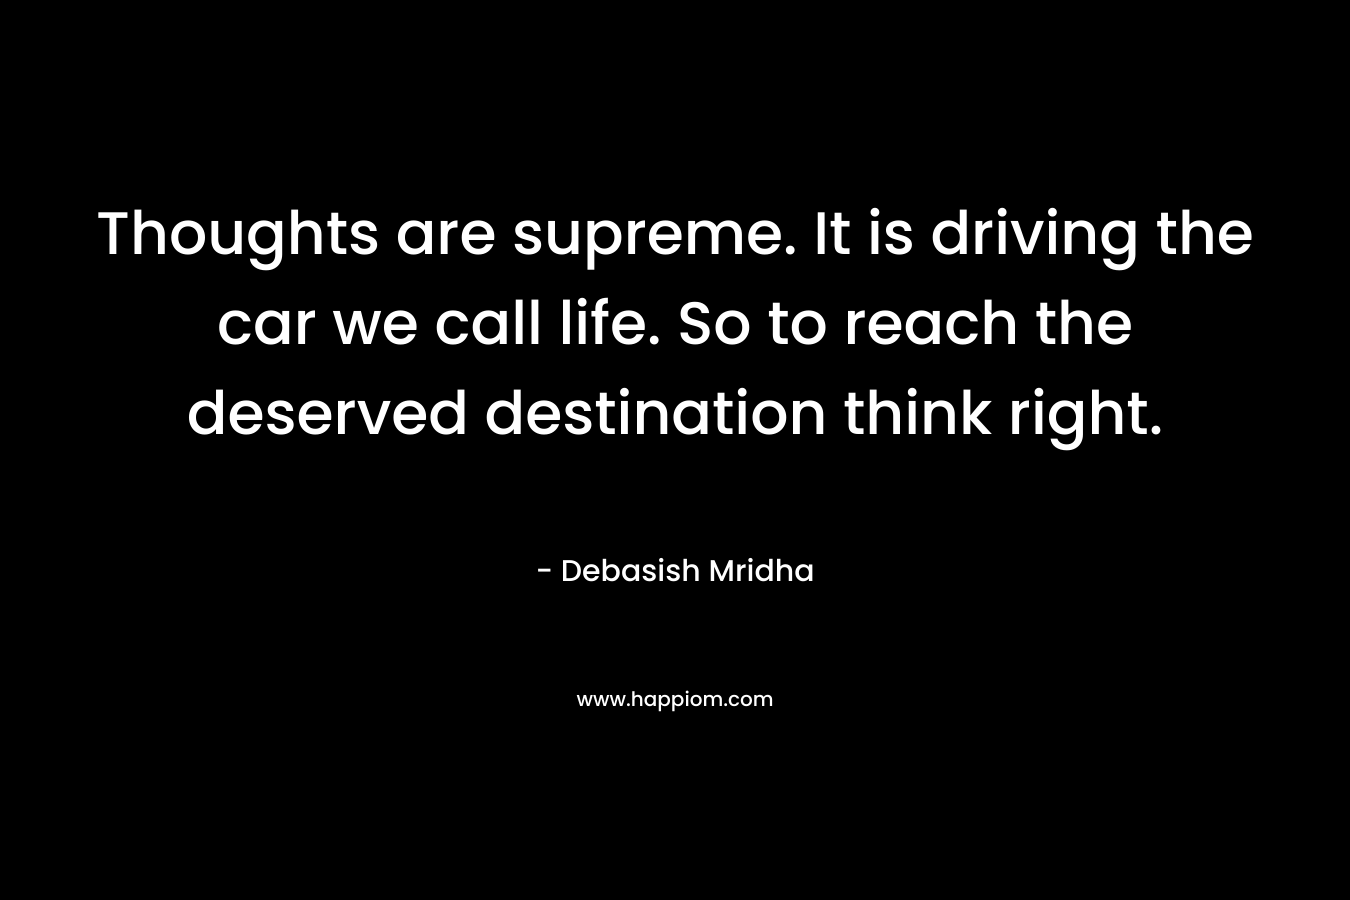 Thoughts are supreme. It is driving the car we call life. So to reach the deserved destination think right.